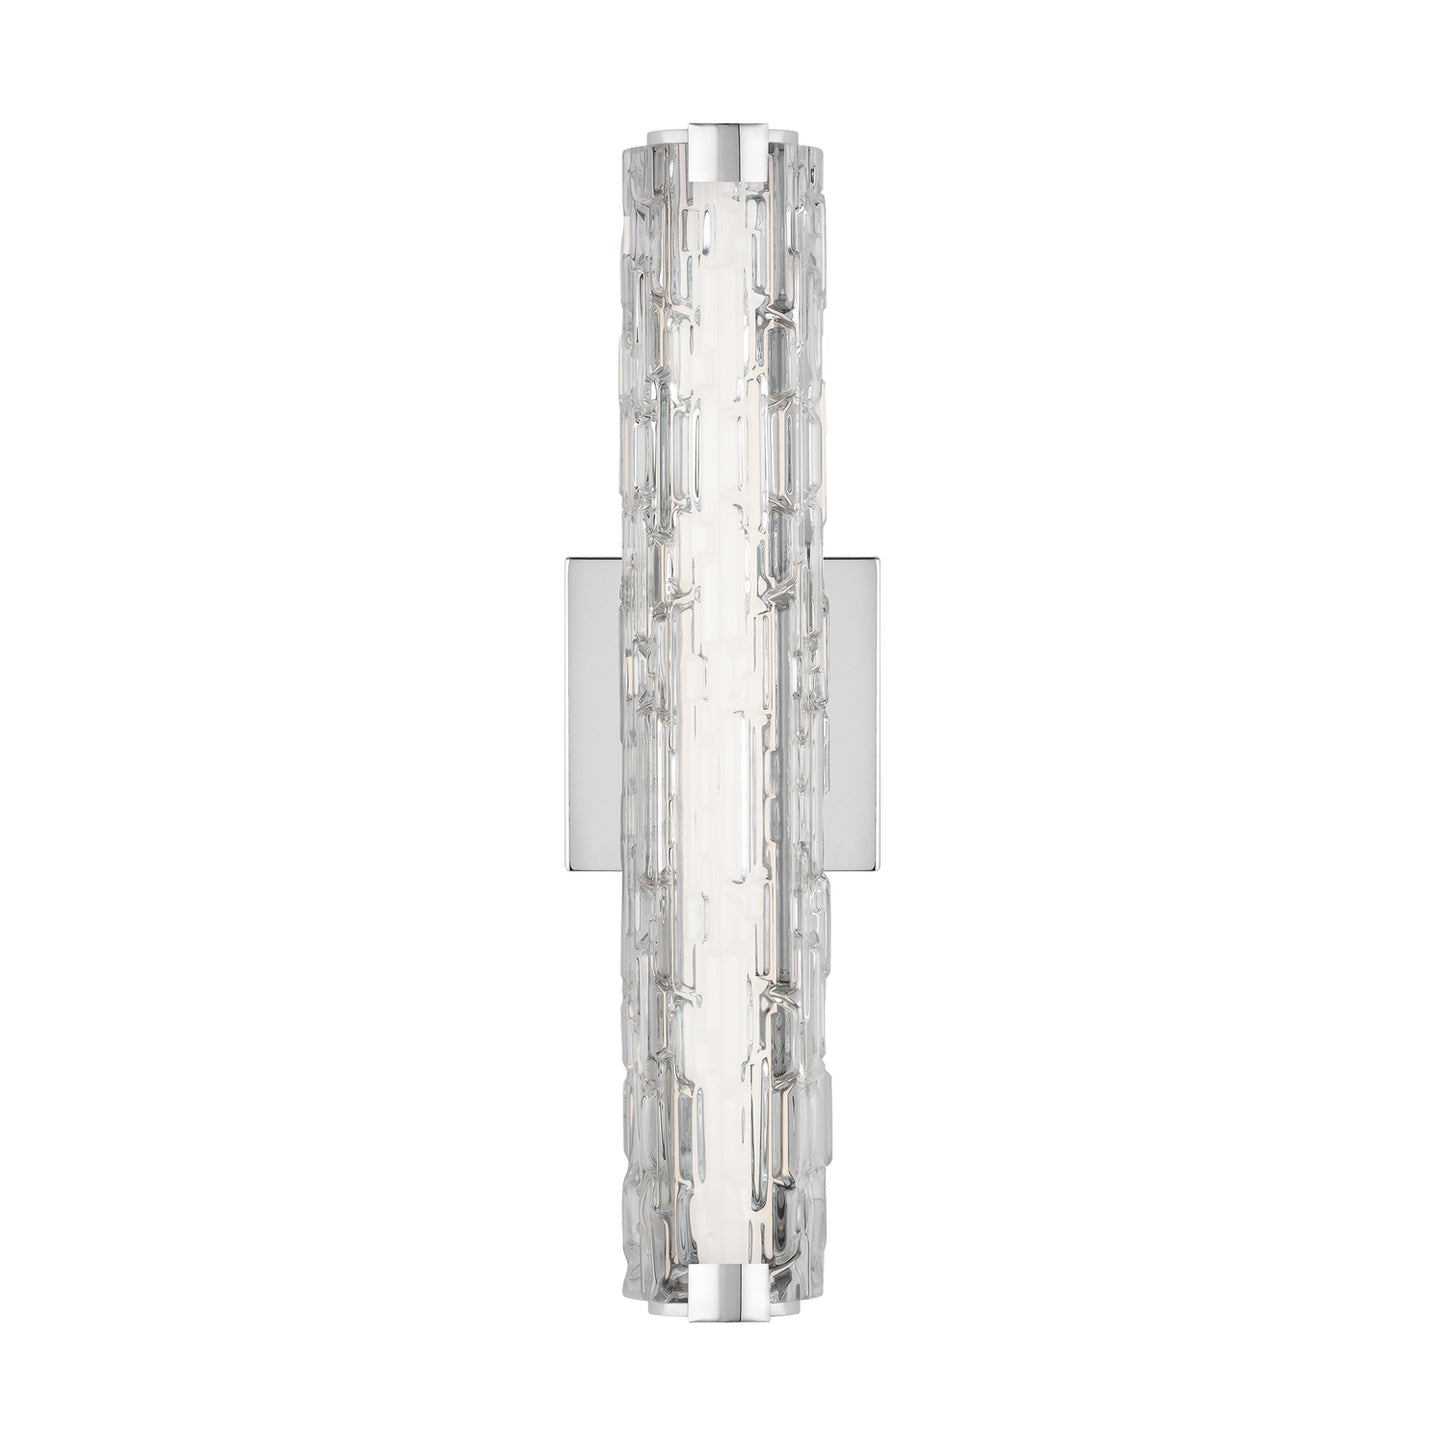 Visual Comfort Studio - WB1876CH-L1 - LED Wall Sconce - Cutler - Chrome